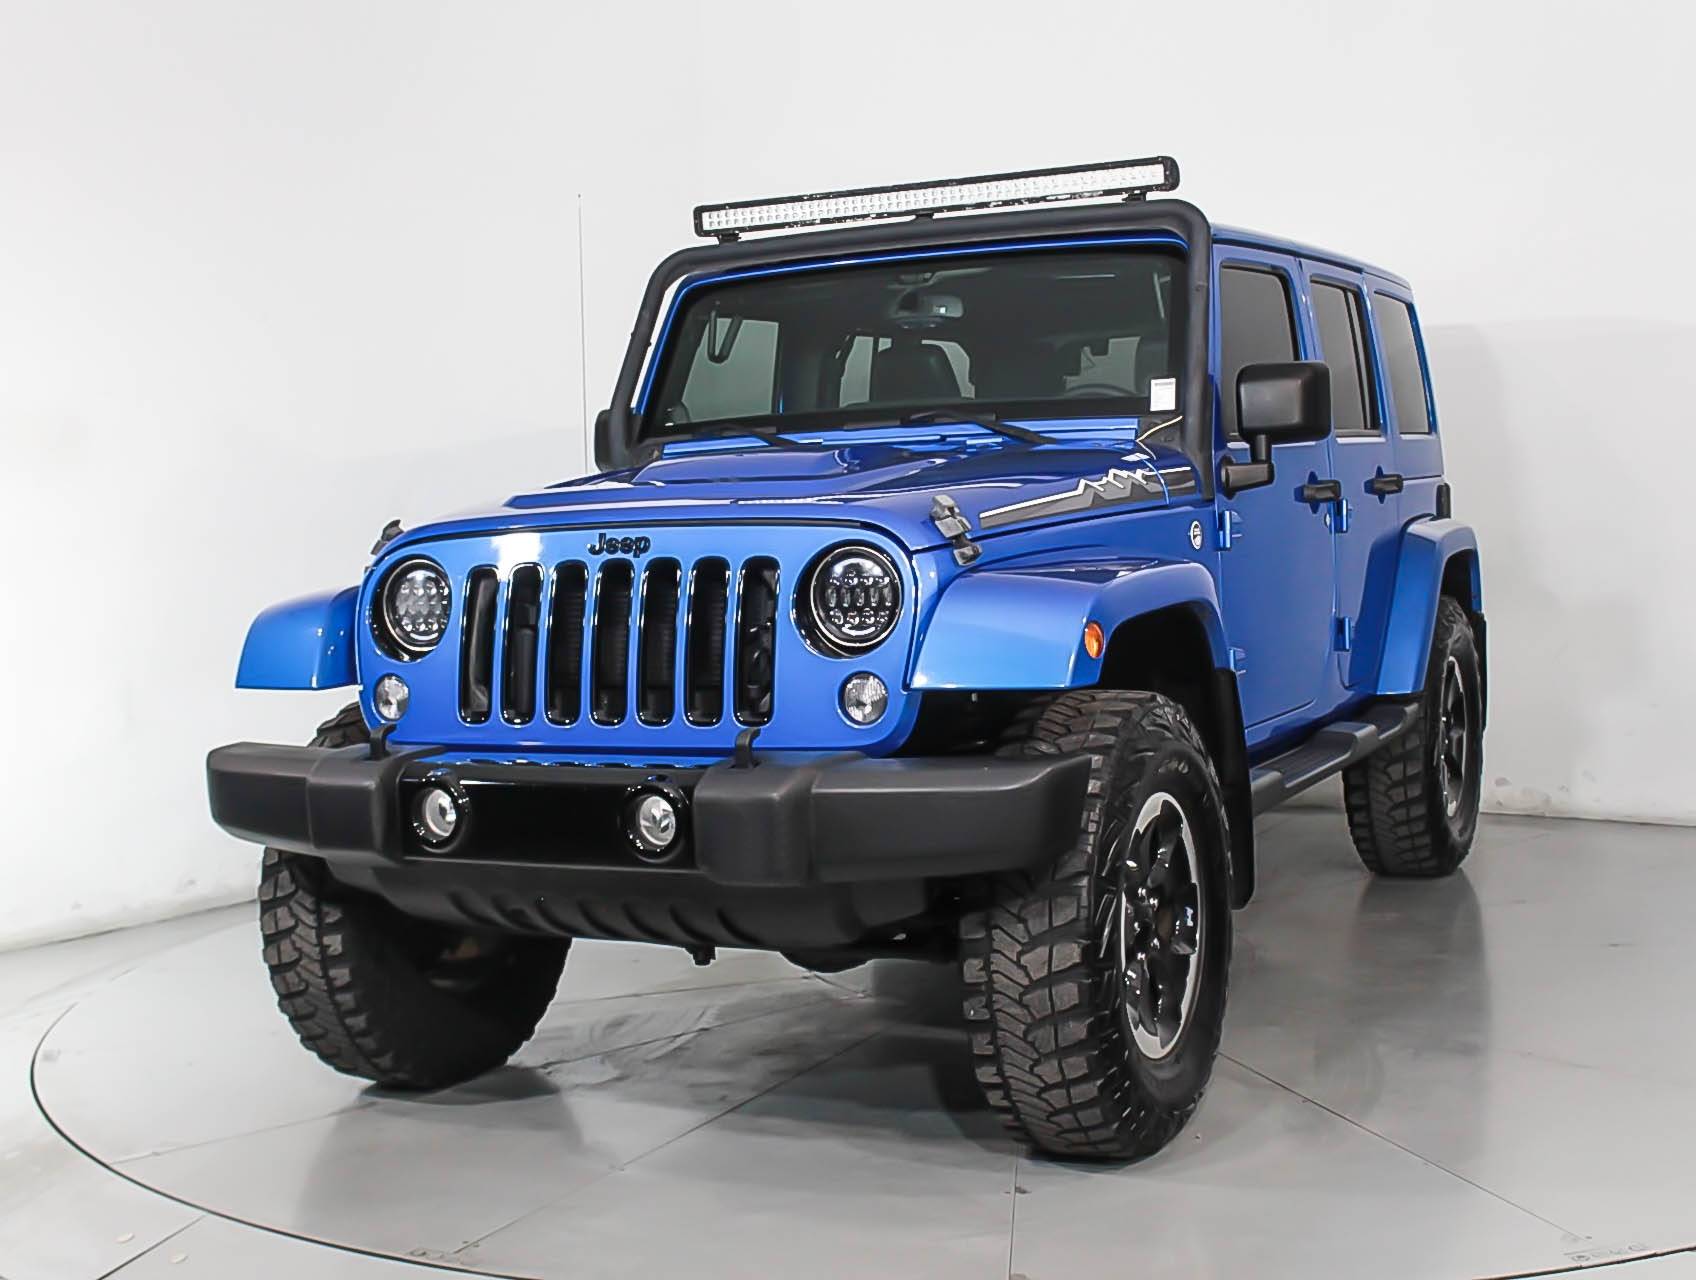 Used 2014 JEEP WRANGLER UNLIMITED Sahara Polar Edition for sale in MIAMI |  102720